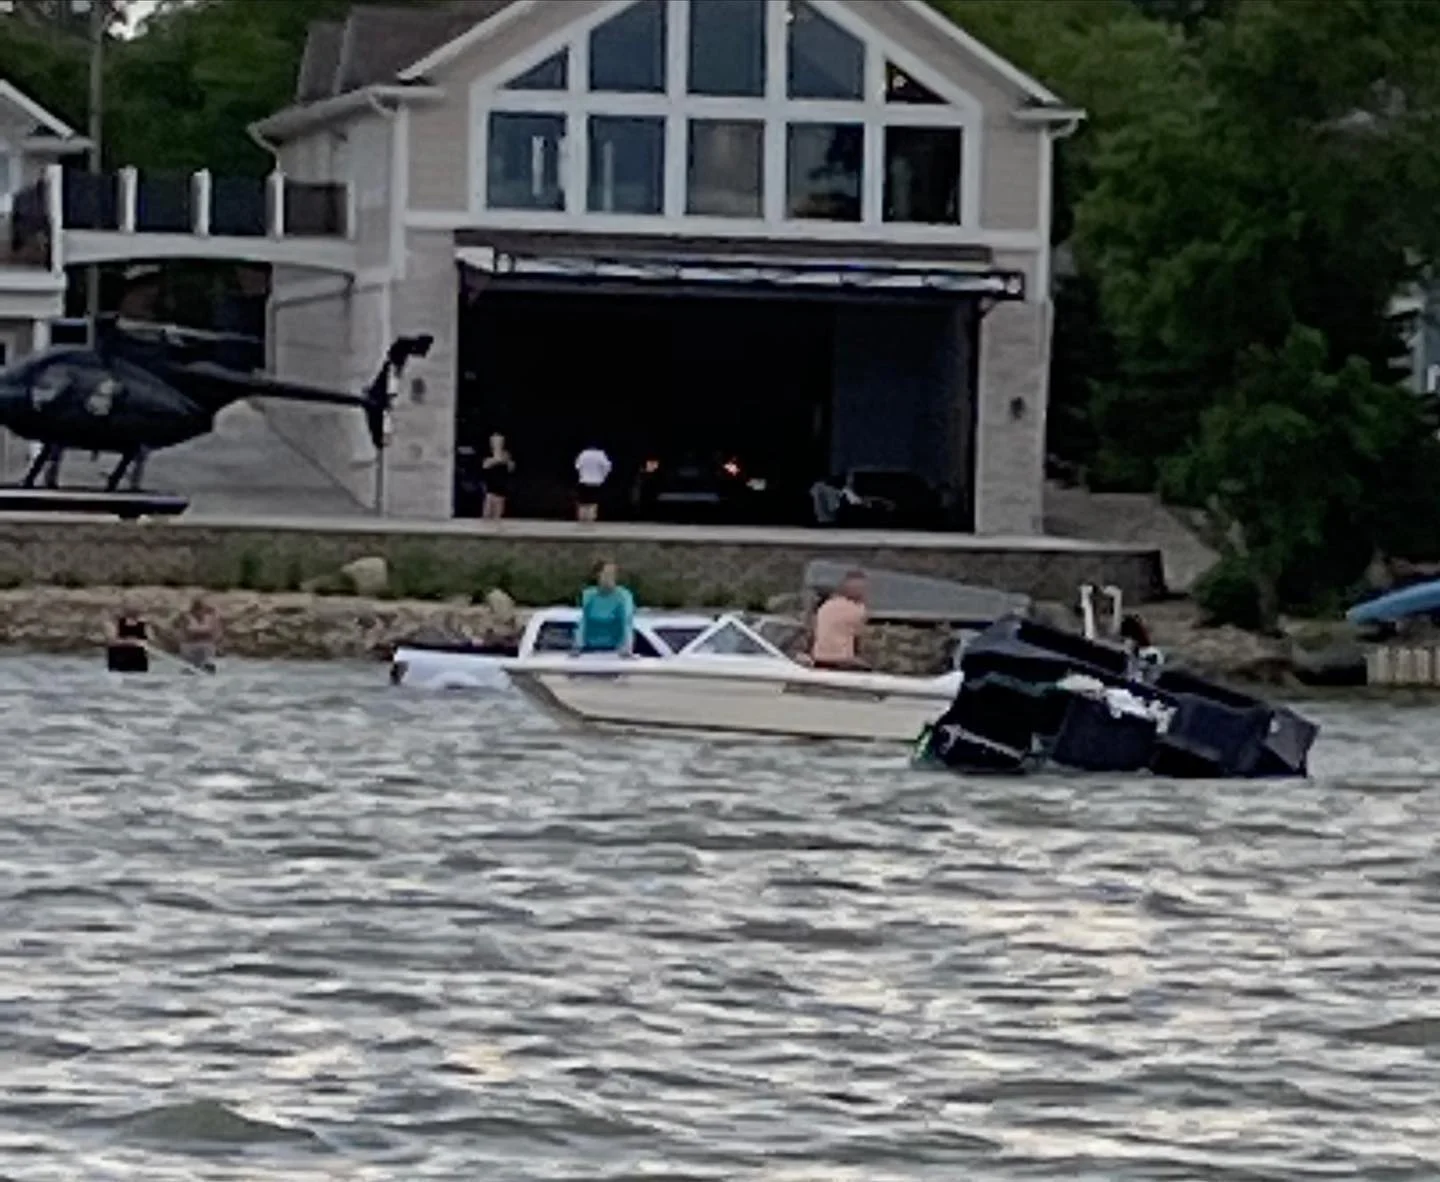 man sinks boat, then f-150 raptor and jeep wrangler trying